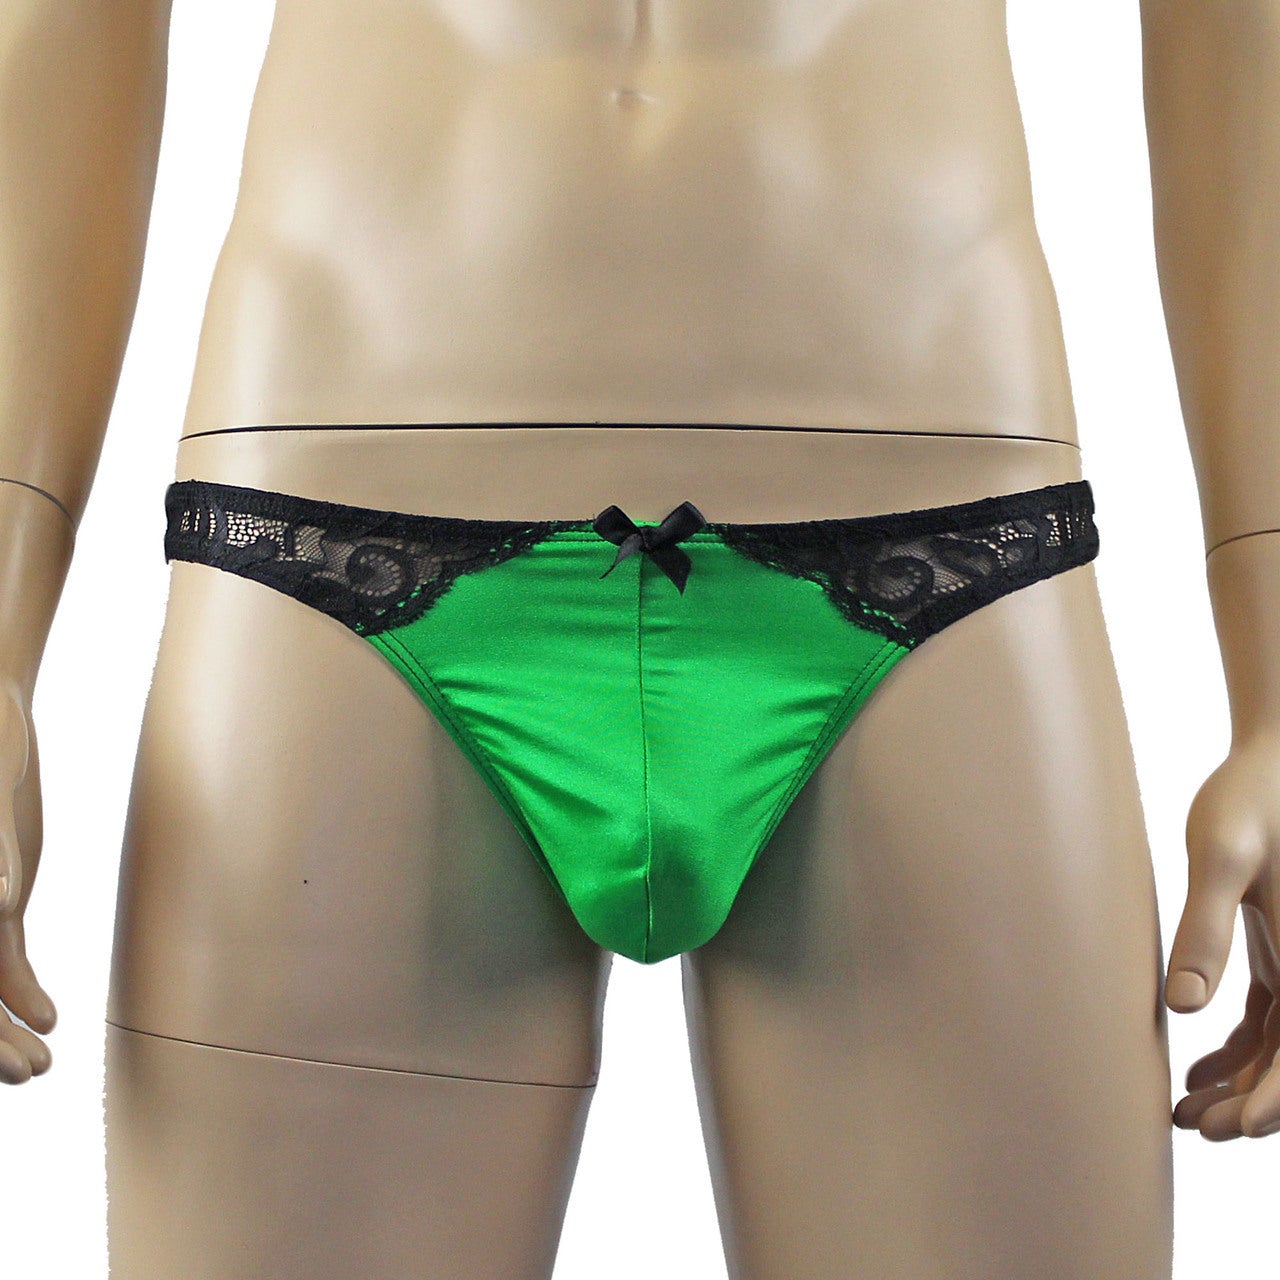 Mens Risque Bra Top and Bikini Brief (green and black plus other colours)